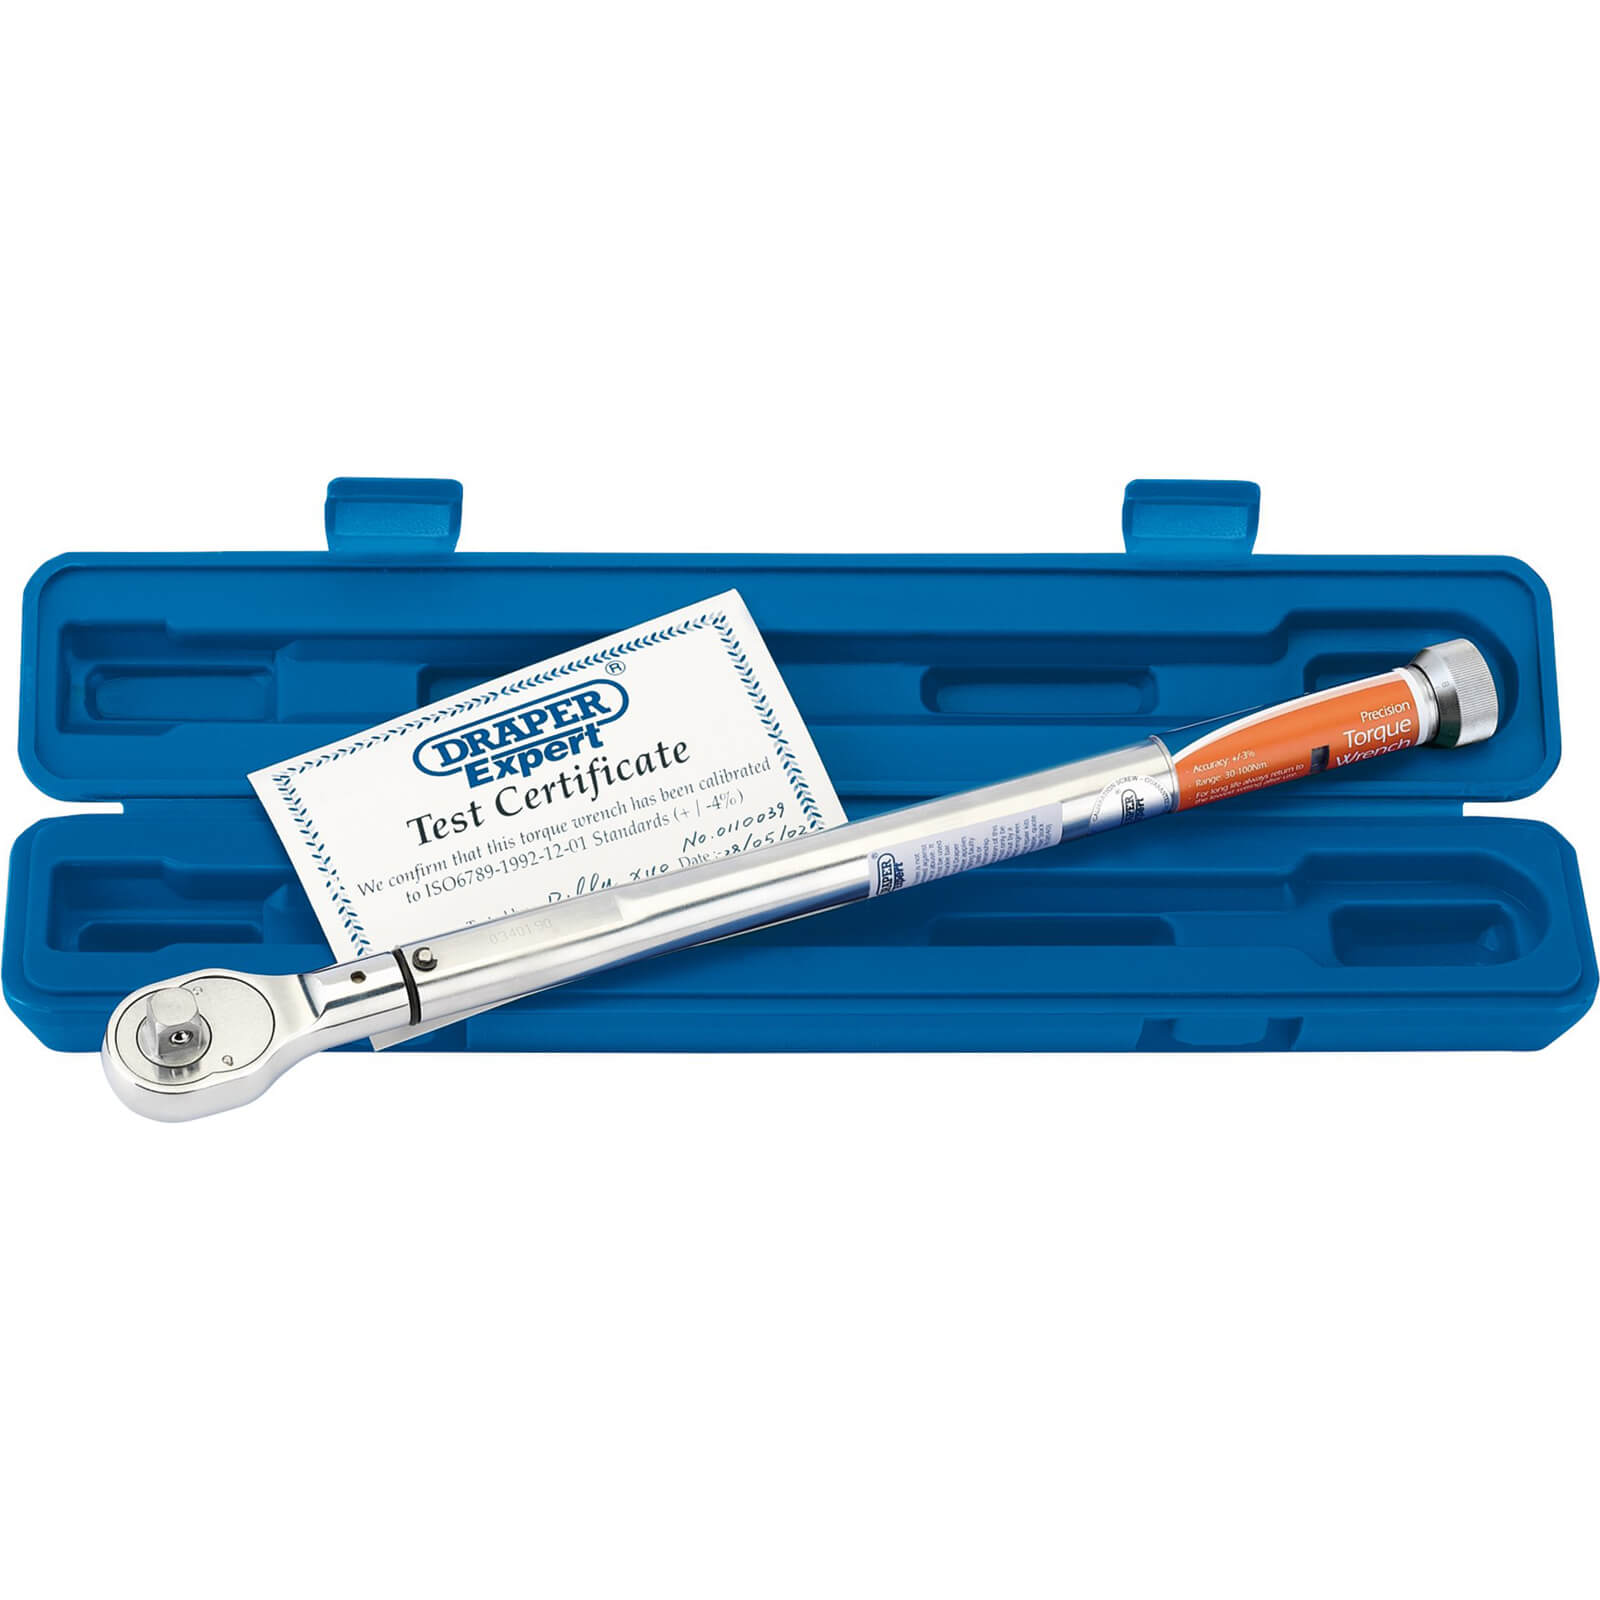 Image of Draper EPTW30-100 1/2" Drive Precision Torque Wrench 1/2" 30Nm - 100Nm